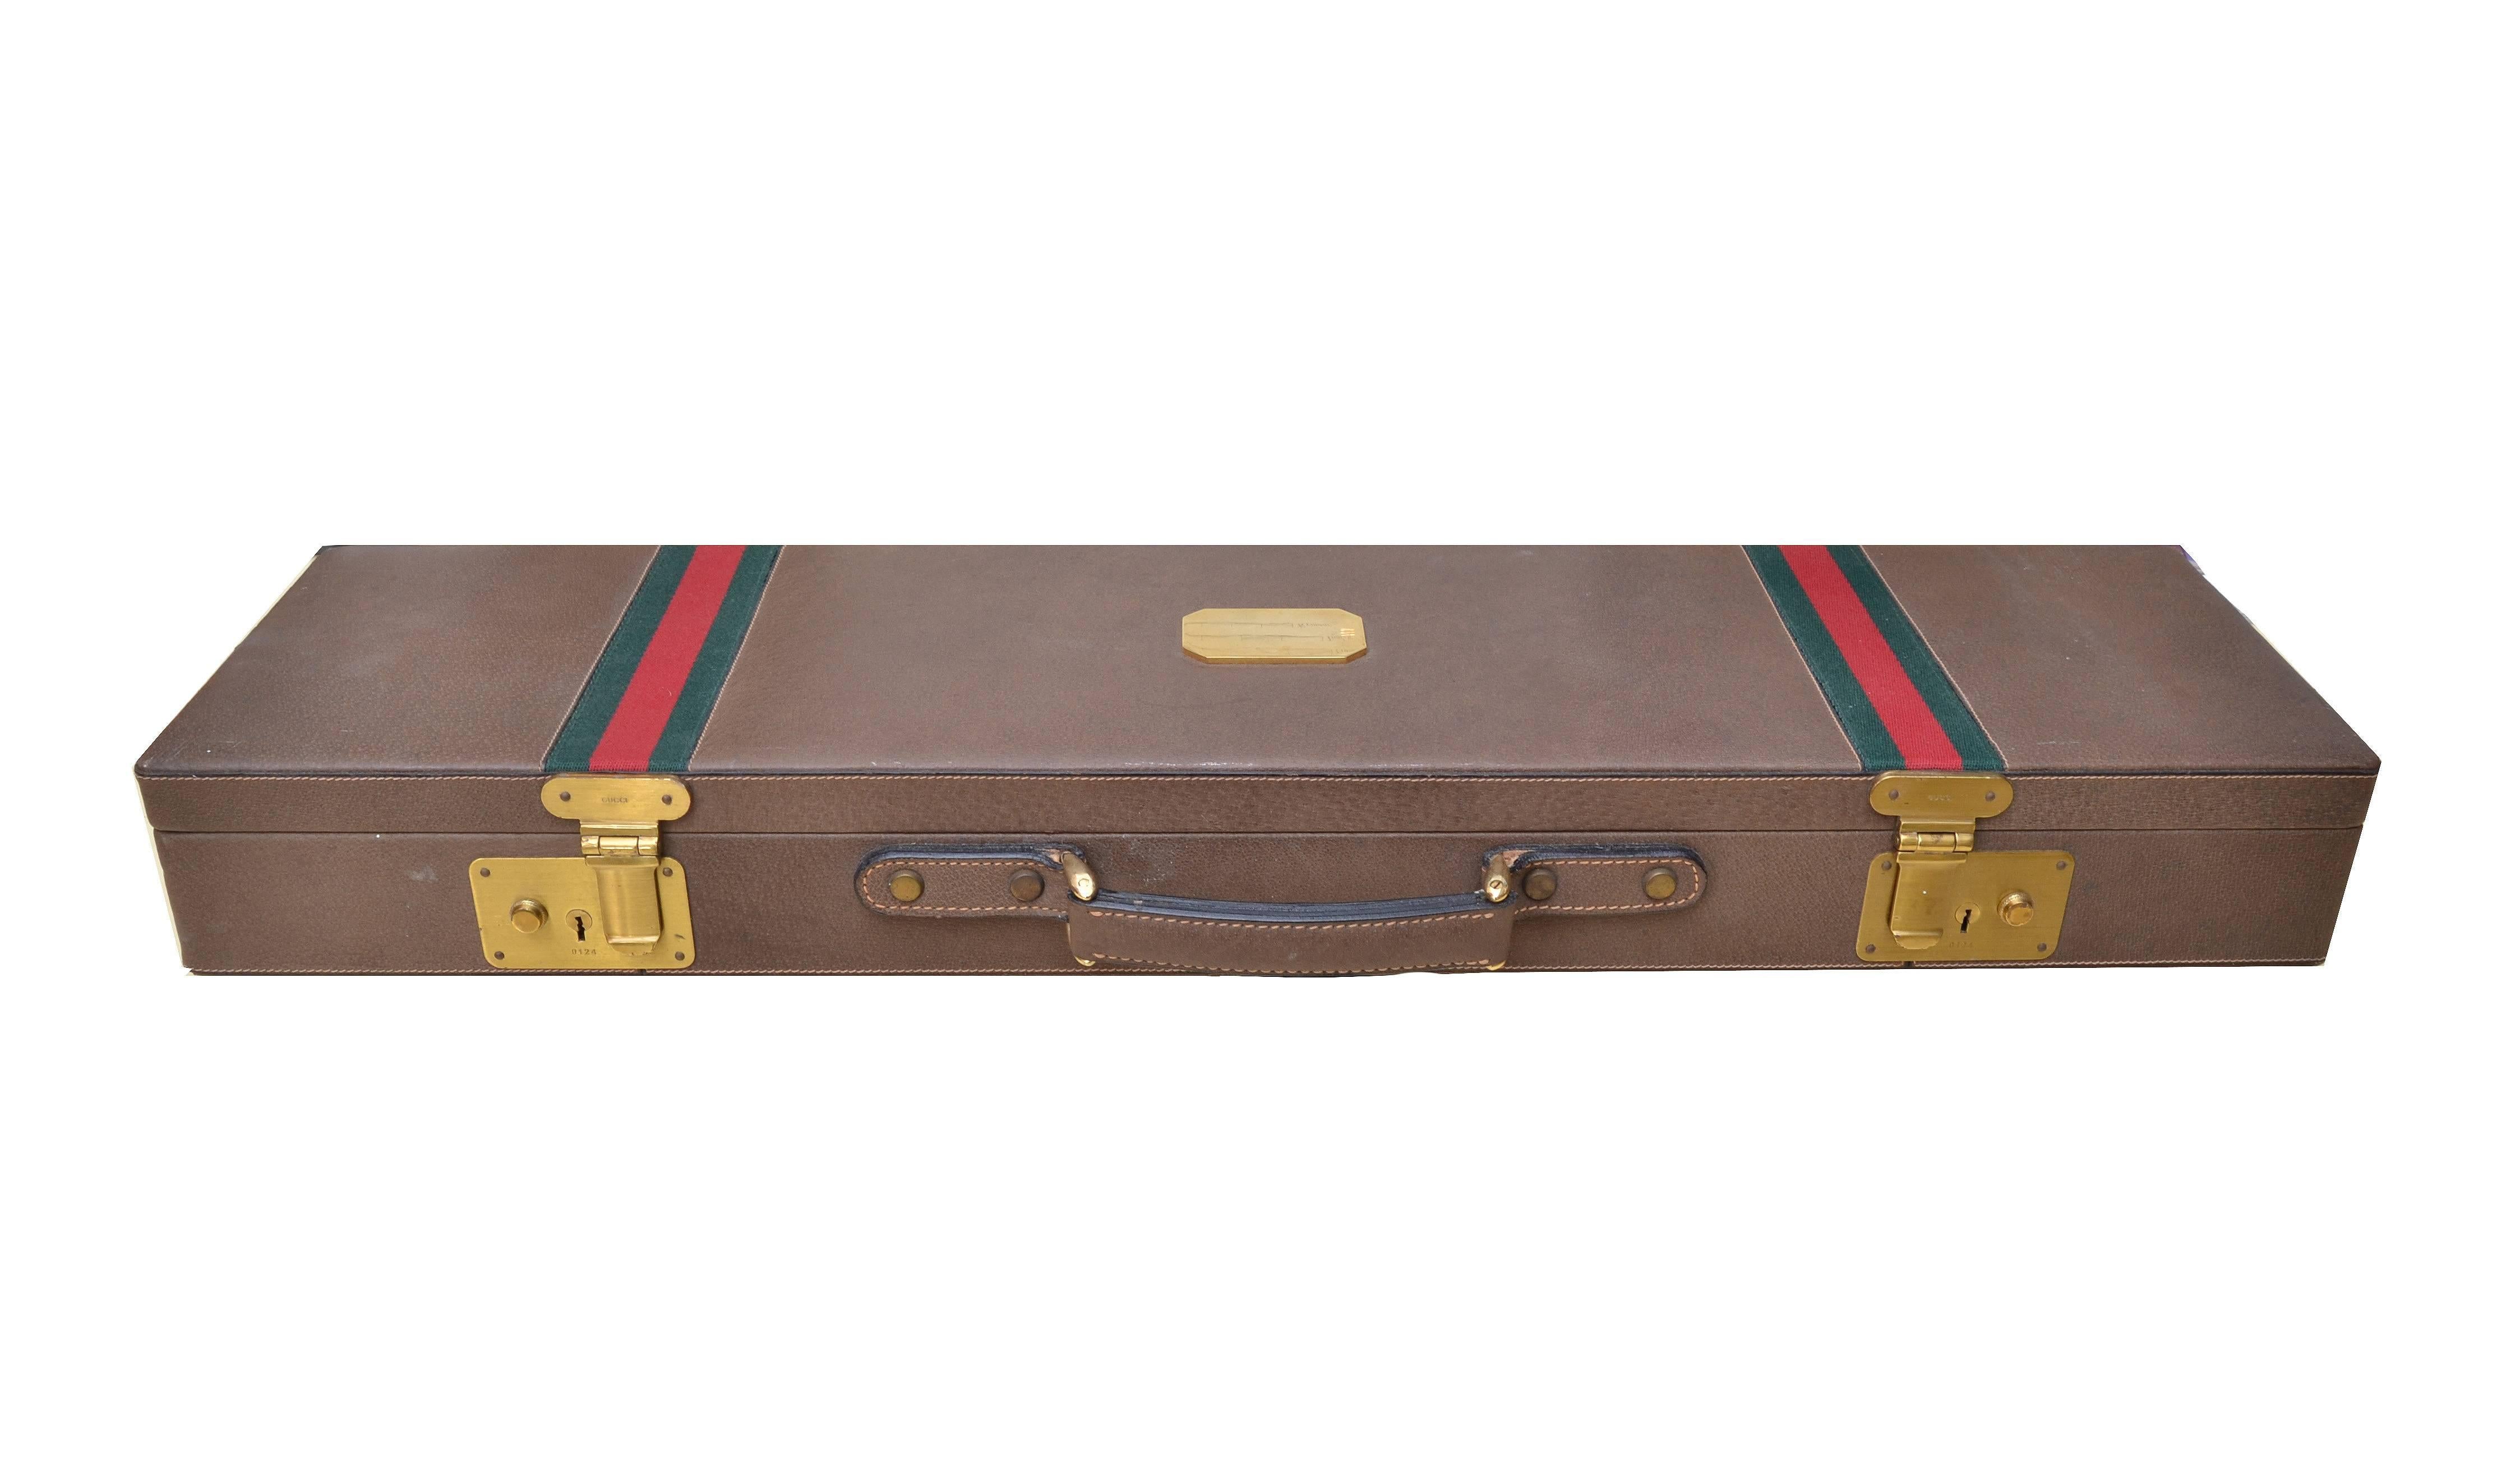 Original Gucci shotgun case in leather and brass.
Comes with keys.
The Interior is fitted with green fleece and leather bands.